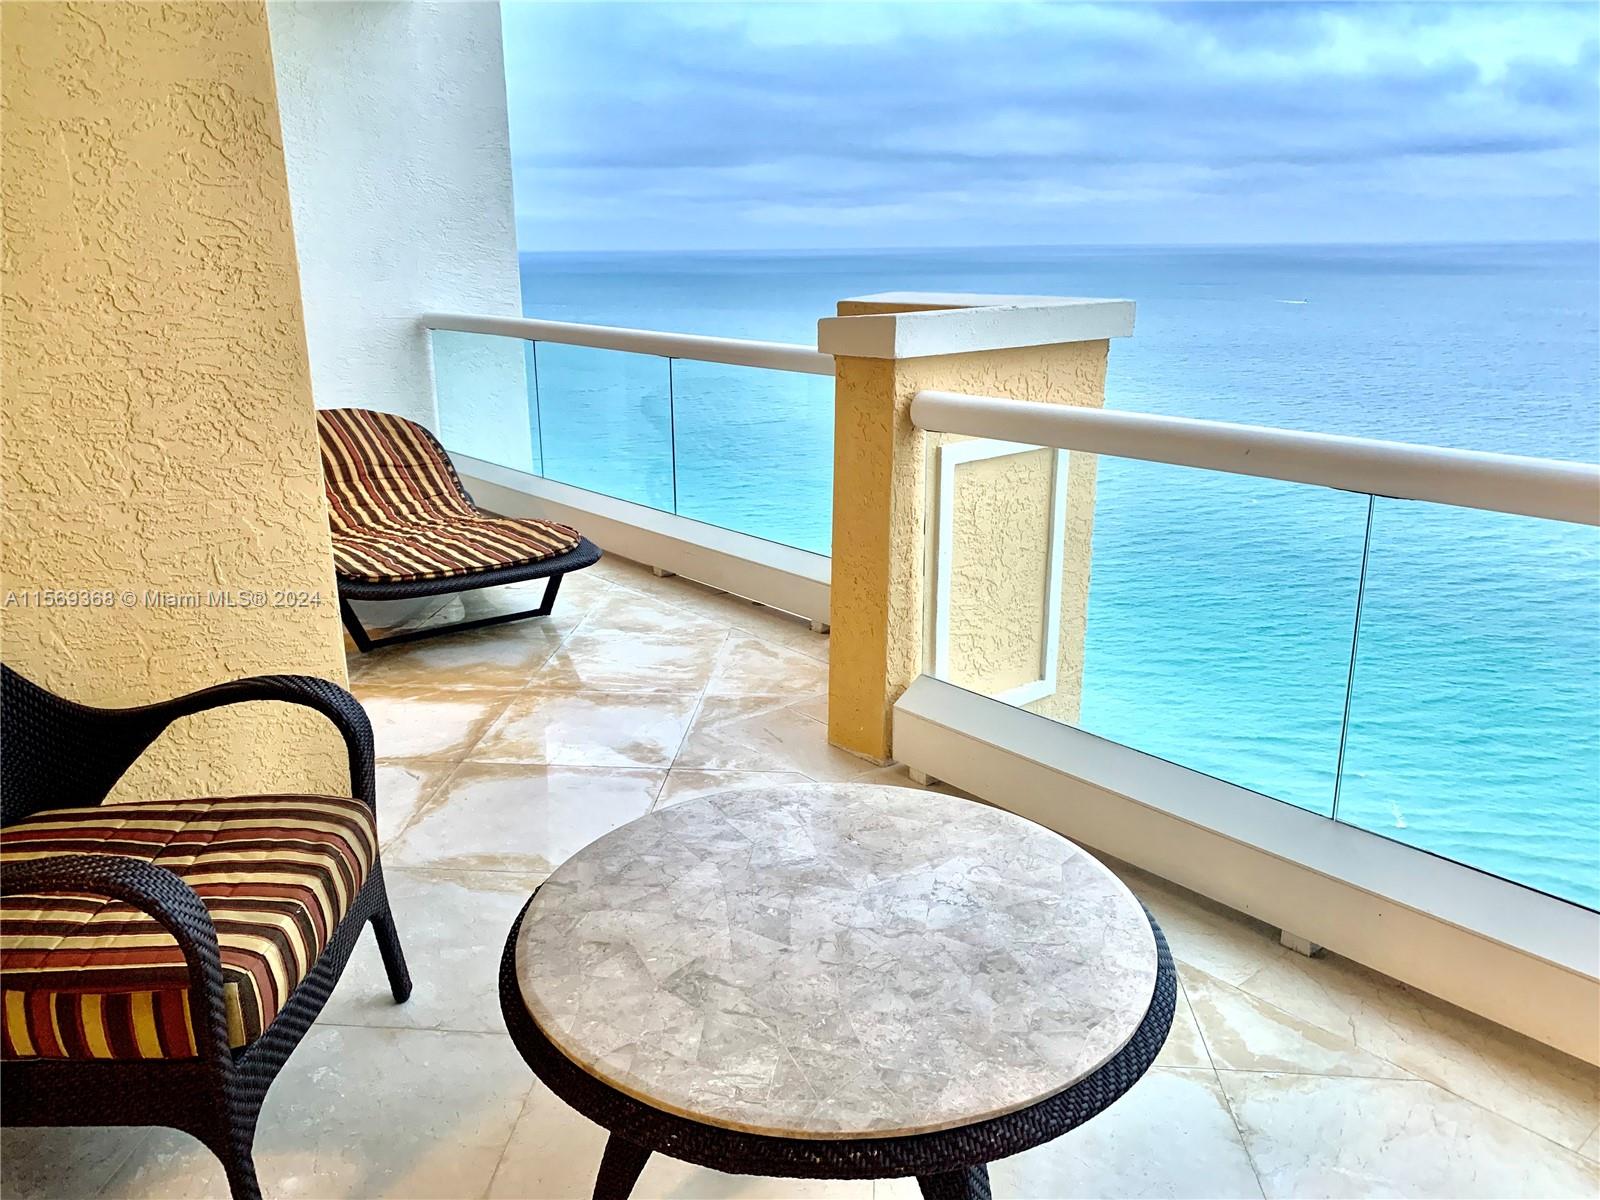 BEAUTIFUL 3/3 UNIT IN LUXURY ACQUALINA WITH BREATHTAKING OCEAN AND INTRACOASTAL VIEW AND 5 STAR AMENITIES!!! FLOWTHRU FLOOR PLAN. SPACIOUS 2,173 square feet, marble floors, fully furnished AS-IS! Currently rented, long term stable tenant. 24 hrs notice to view.